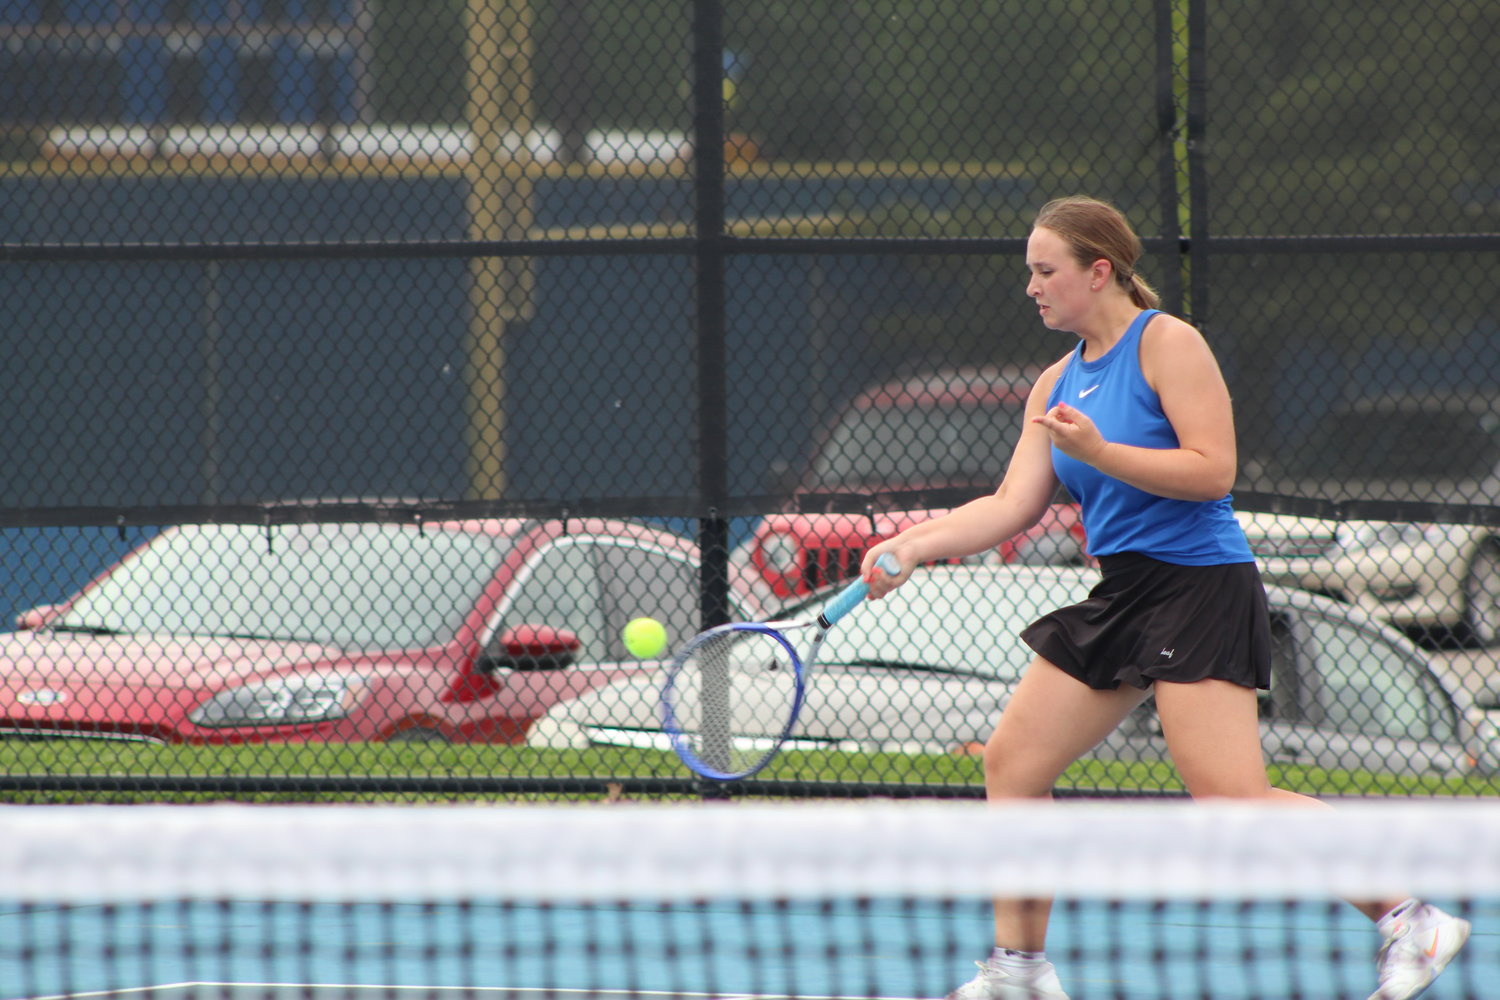 Sophomore Samantha Rohr defeated Long at one singles in a competitive match.